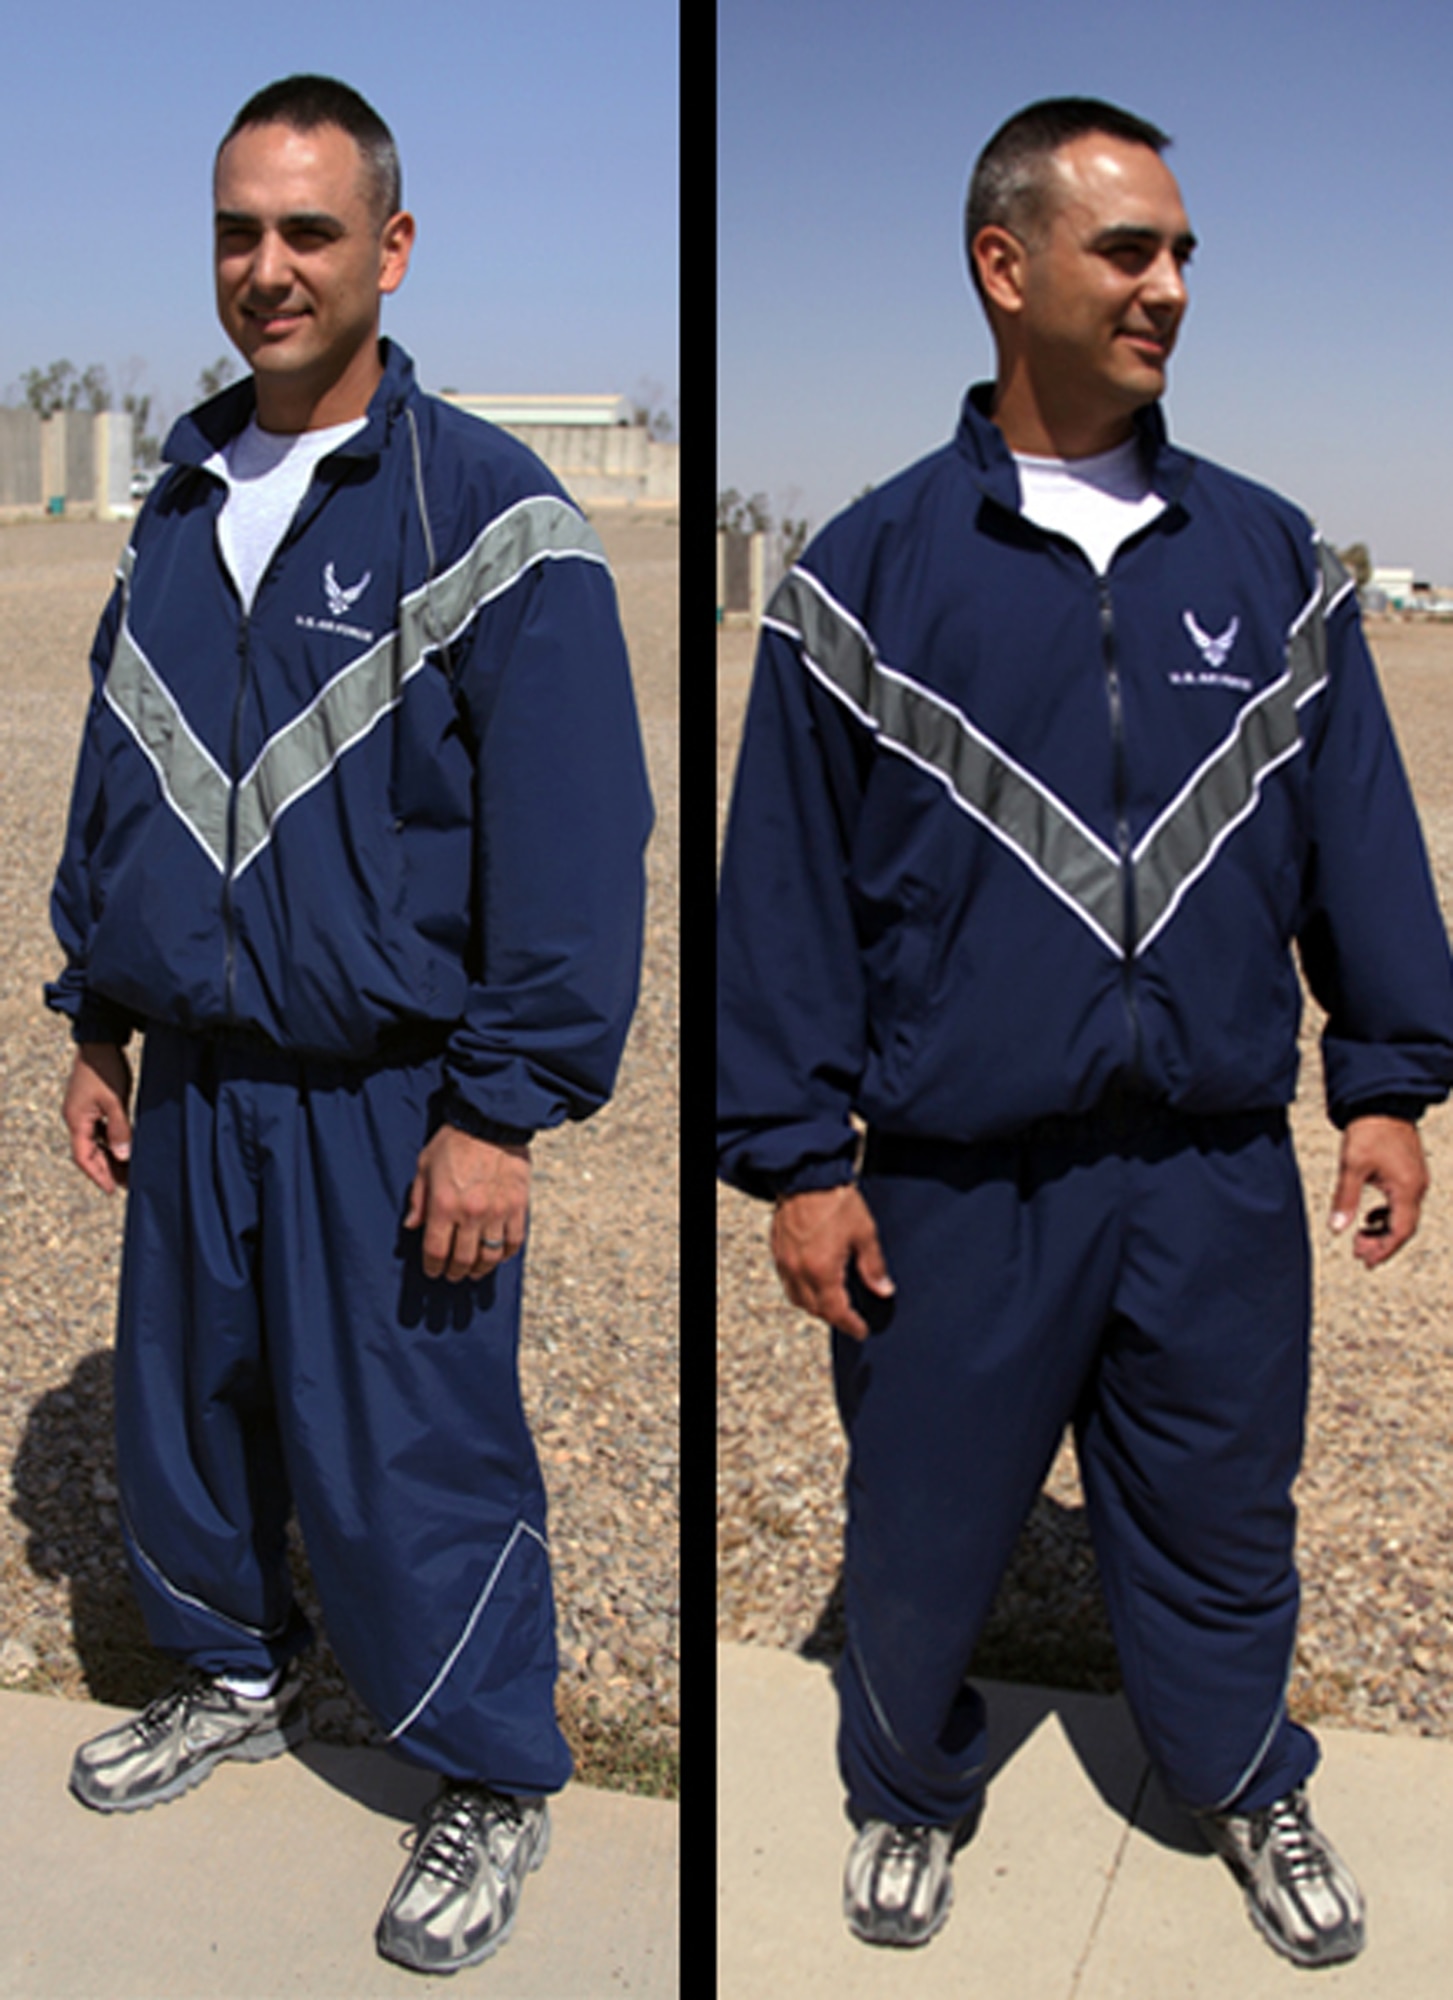 Physical fitness uniform has wear guidelines too > 446th Airlift Wing > News